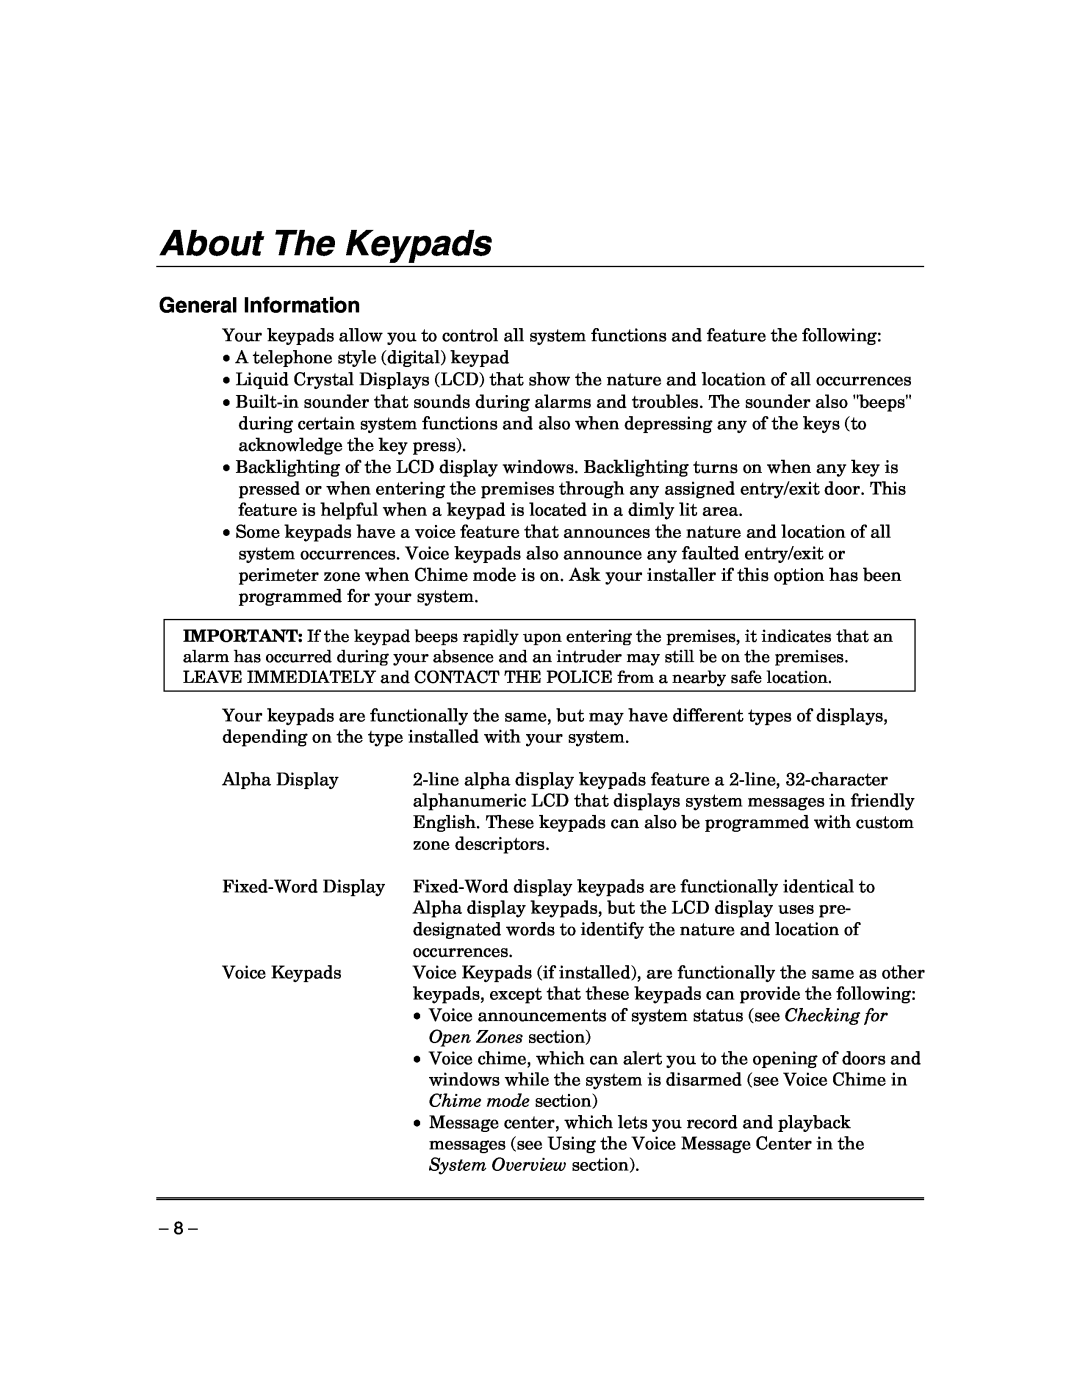 Honeywell VISTA-21IPSIA manual About The Keypads, General Information, Open Zones section, Chime mode section 